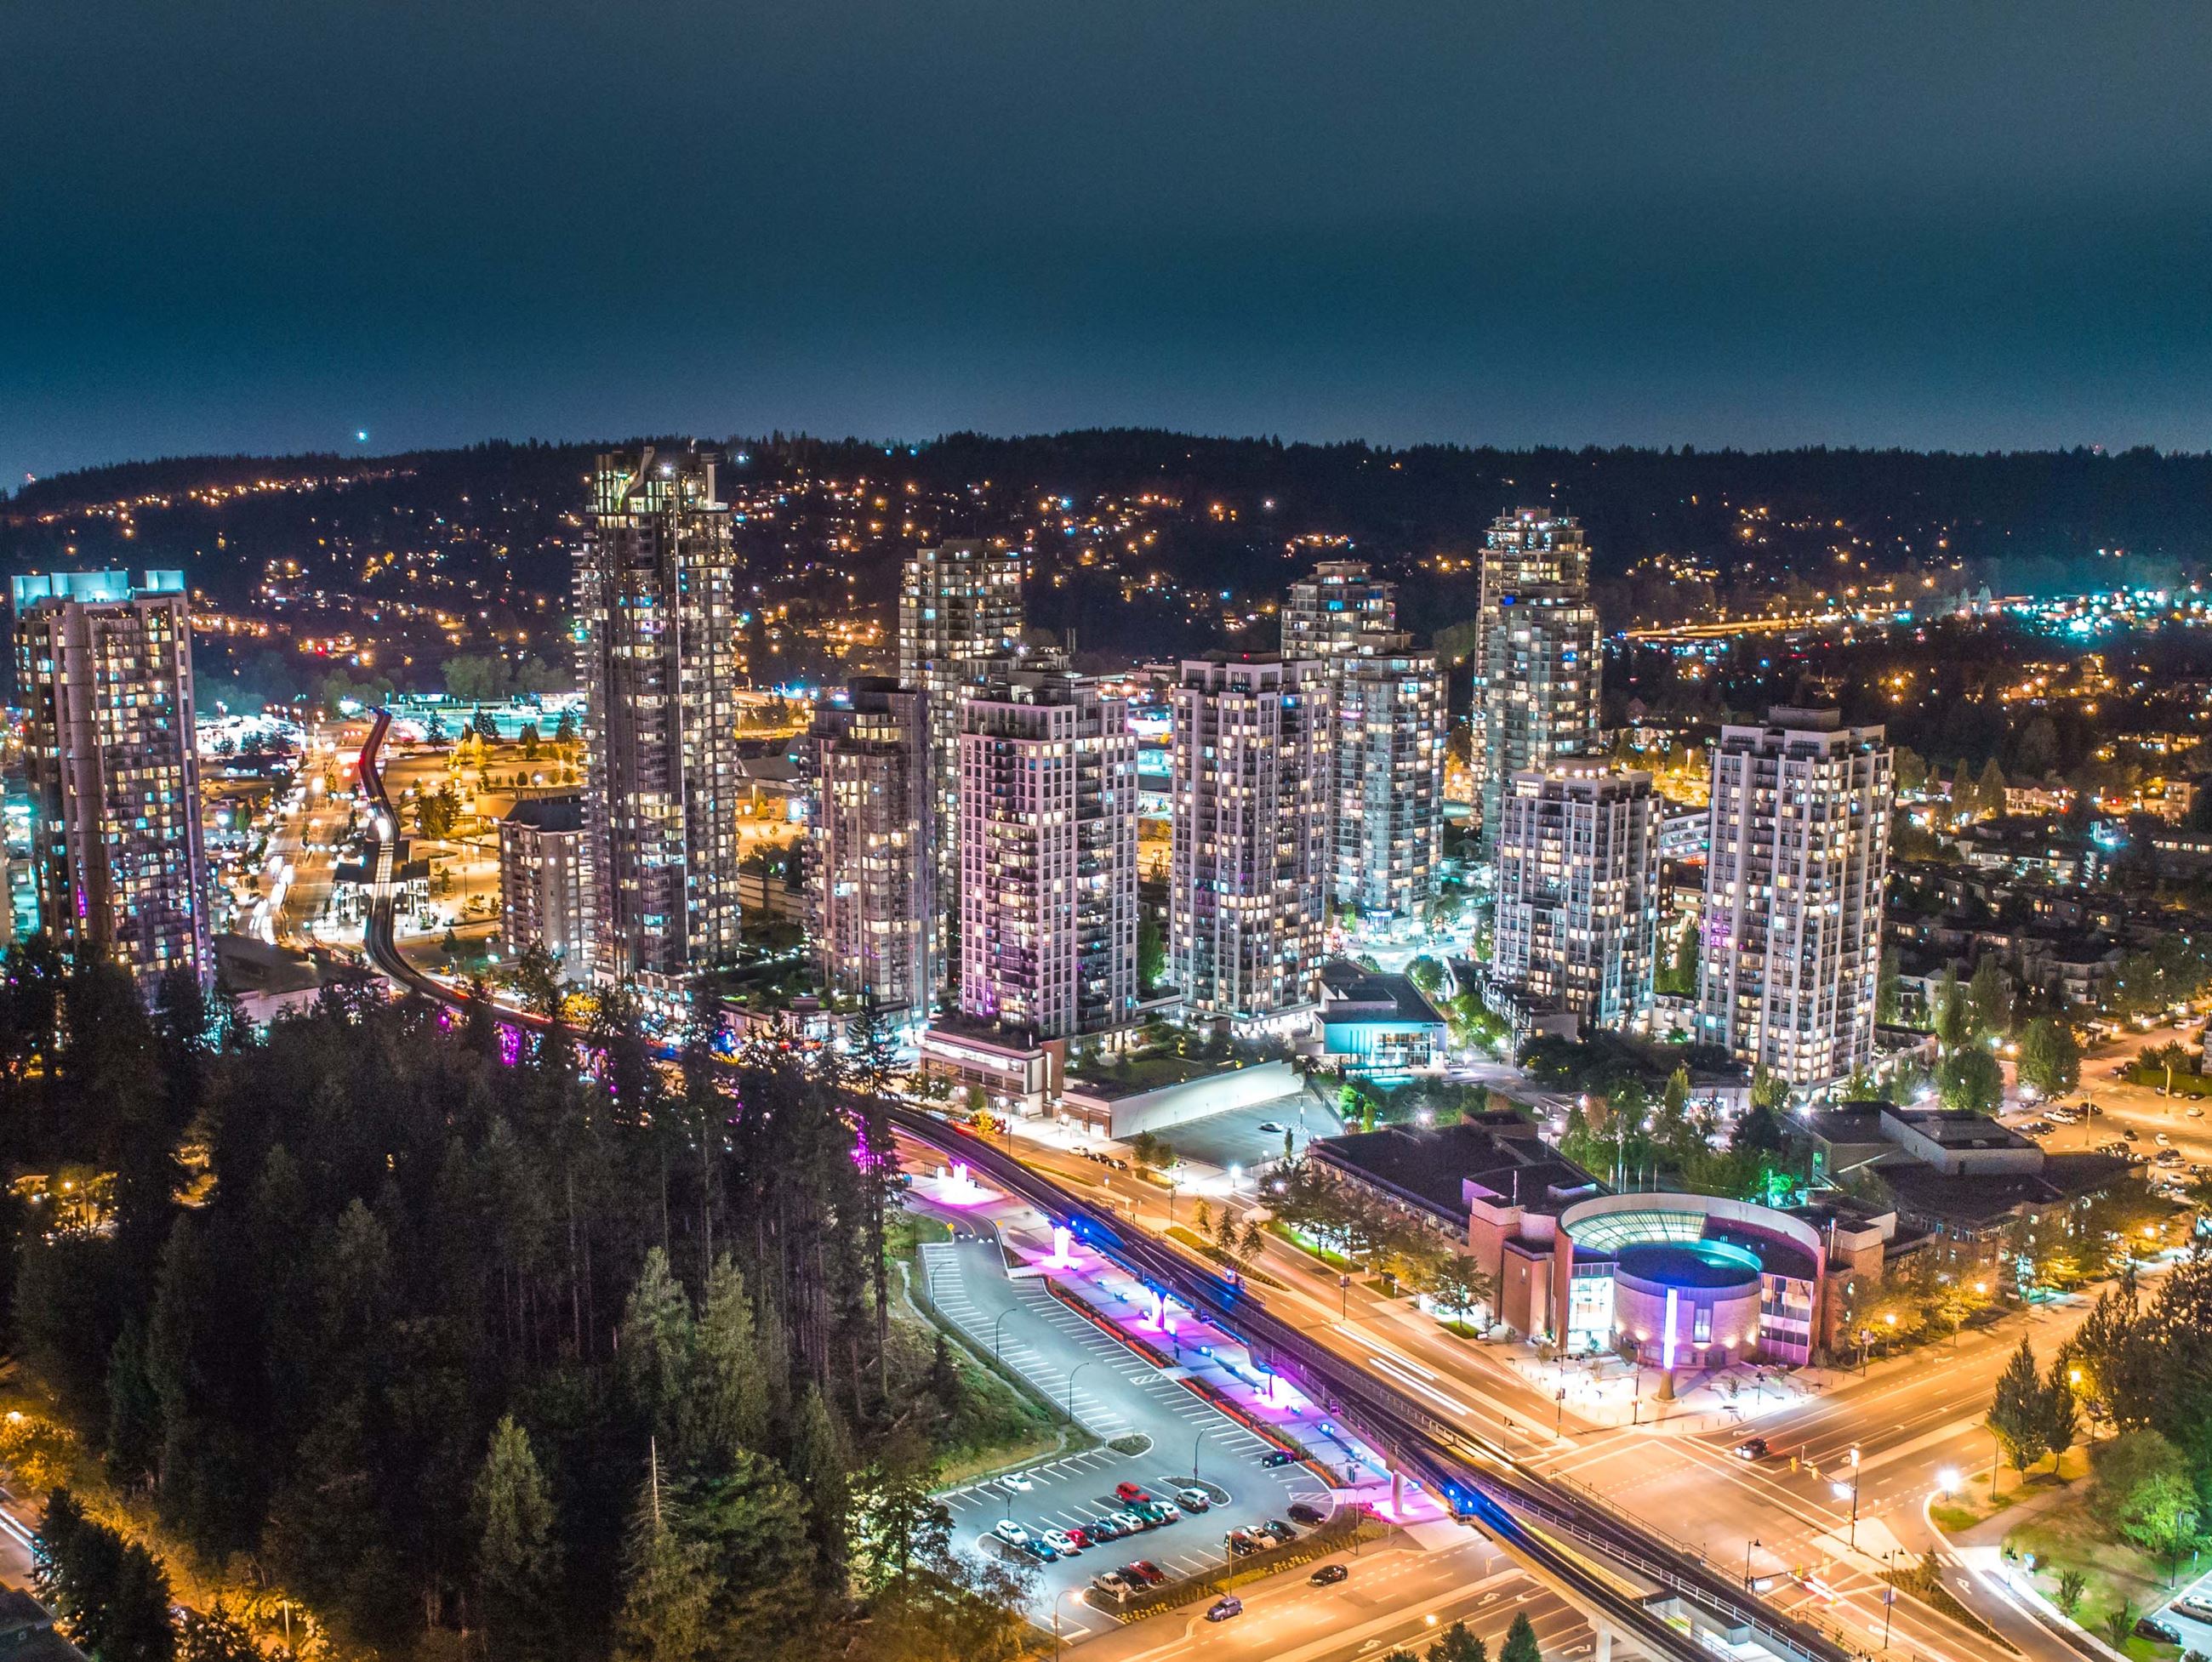 Aerial image of Coquitlam's City Centre at night